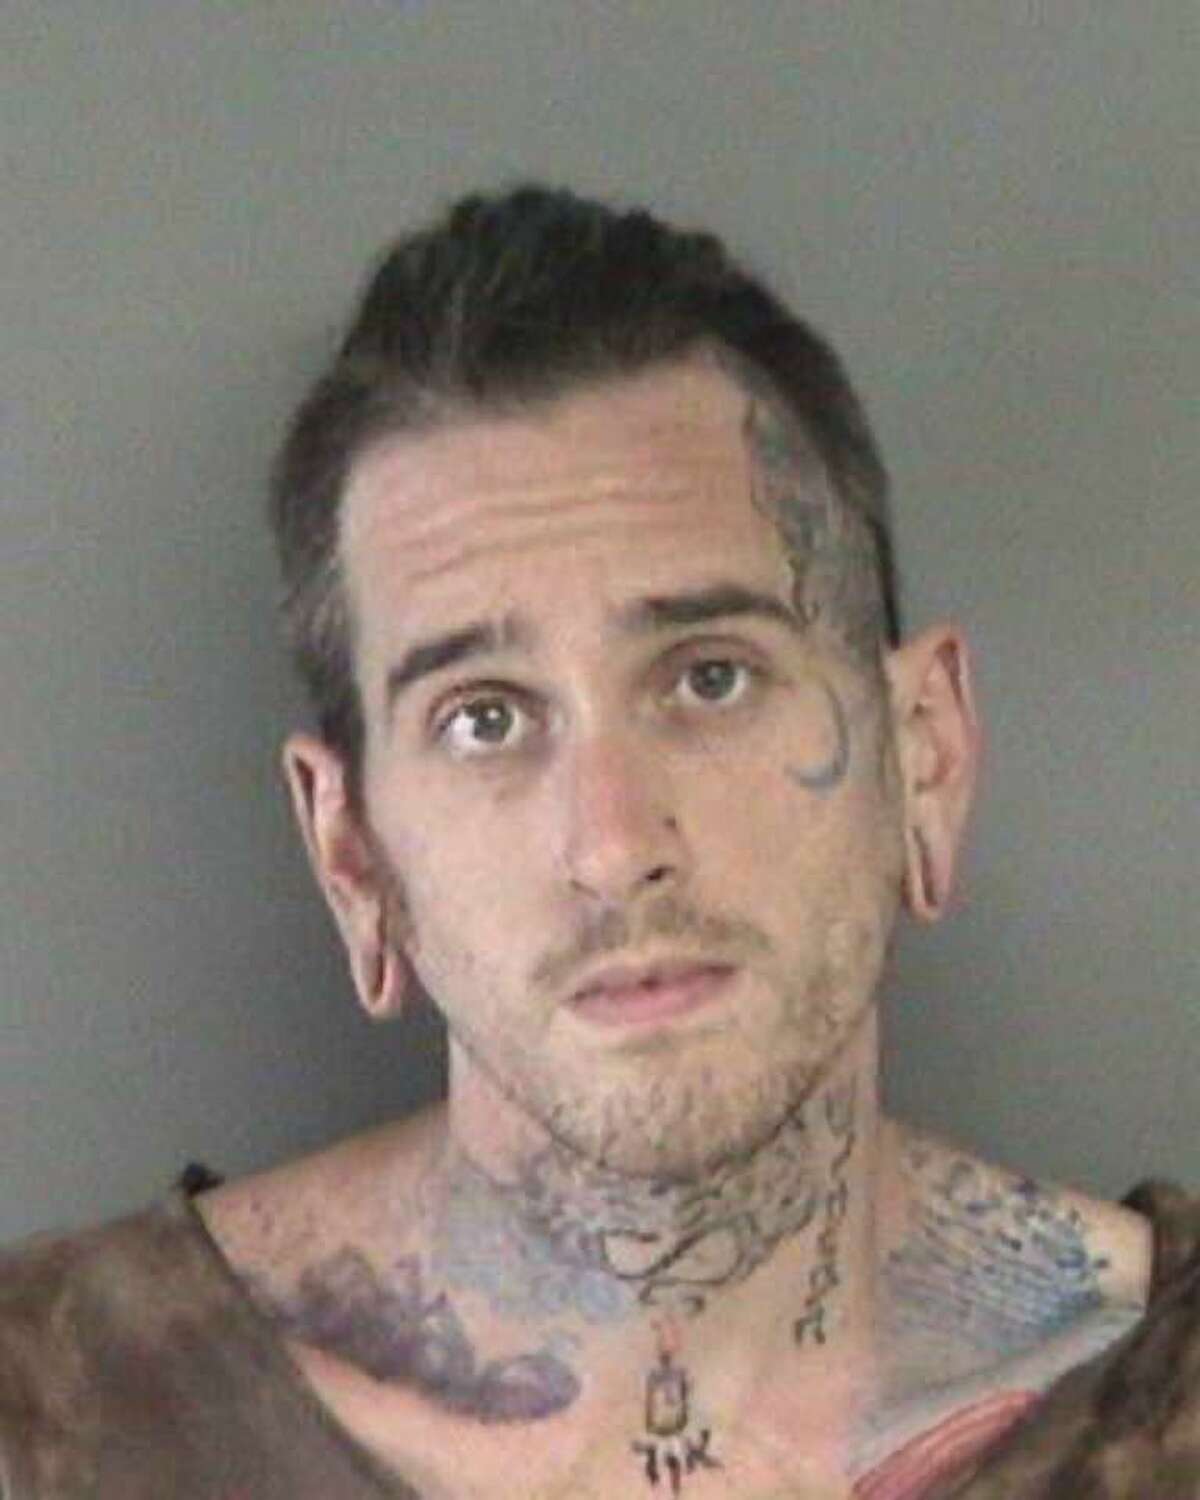 Max Harris faces 36 counts of involuntary manslaughter related to the 2016 Ghost Ship fire in Oakland.